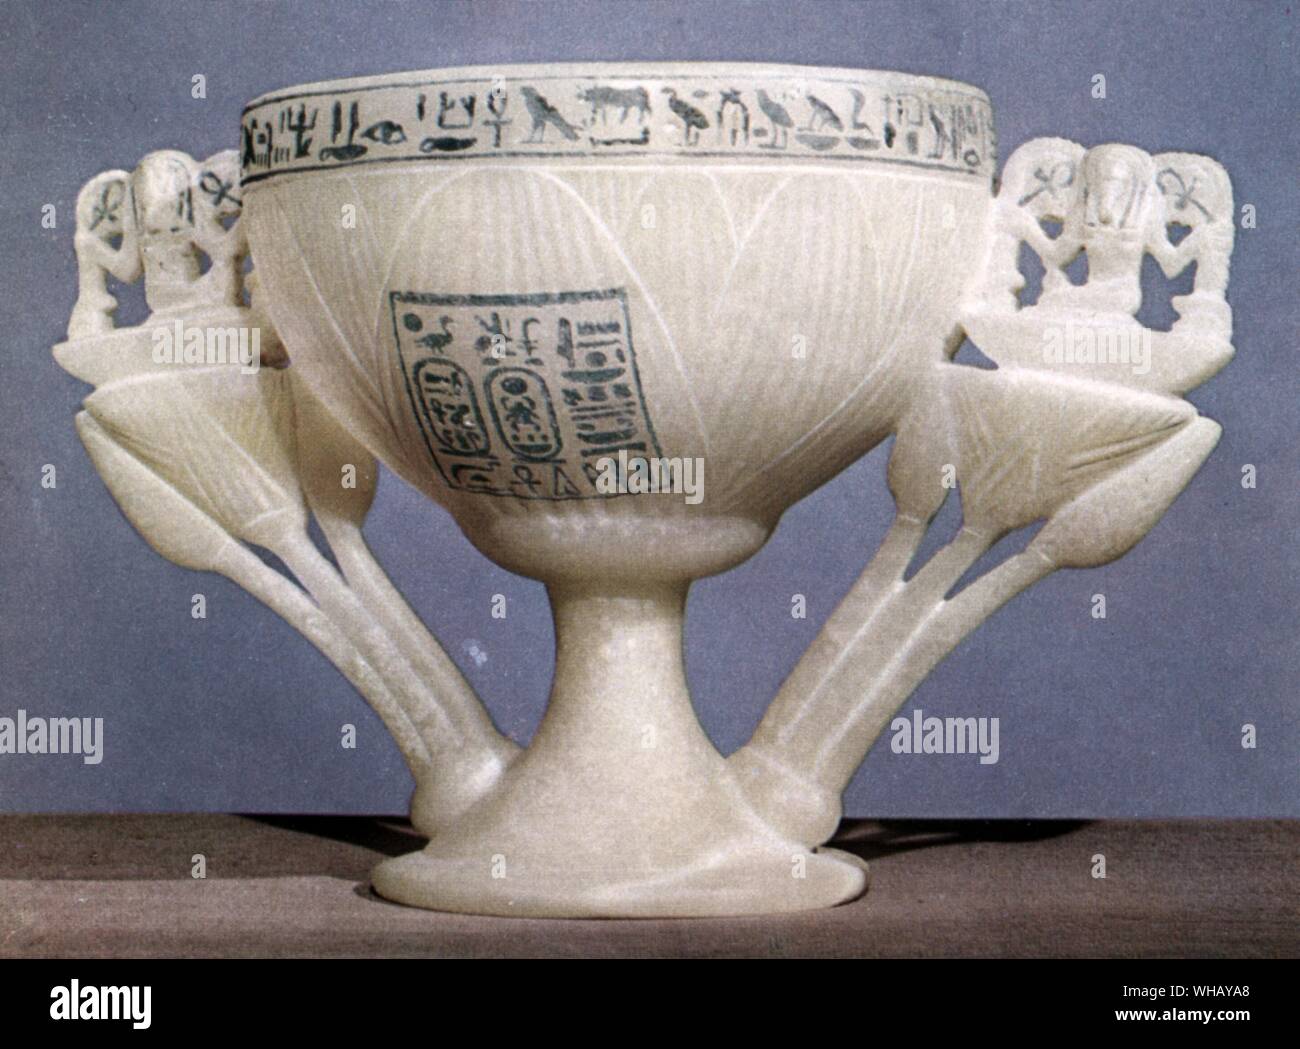 Drinking cup, found at the entrance of the tomb made of calcite, is sculpted in the form of a half open lotus flower. Tukankhamen, by Christiane Desroches Noblecourt, page 98. . The blue lotus was a symbol of the Sun God and the pharaohs. Like the sun that sets in the evening and rises in the morning, the lotus flower blooms in the day and closes each night. In one version of the creation myth, the sun first rose out of a giant lotus flower that bloomed on the primordial mound. The lotus thus became a symbol of rebirth, the renewal of life and the promise of everlasting life.. . Stock Photo